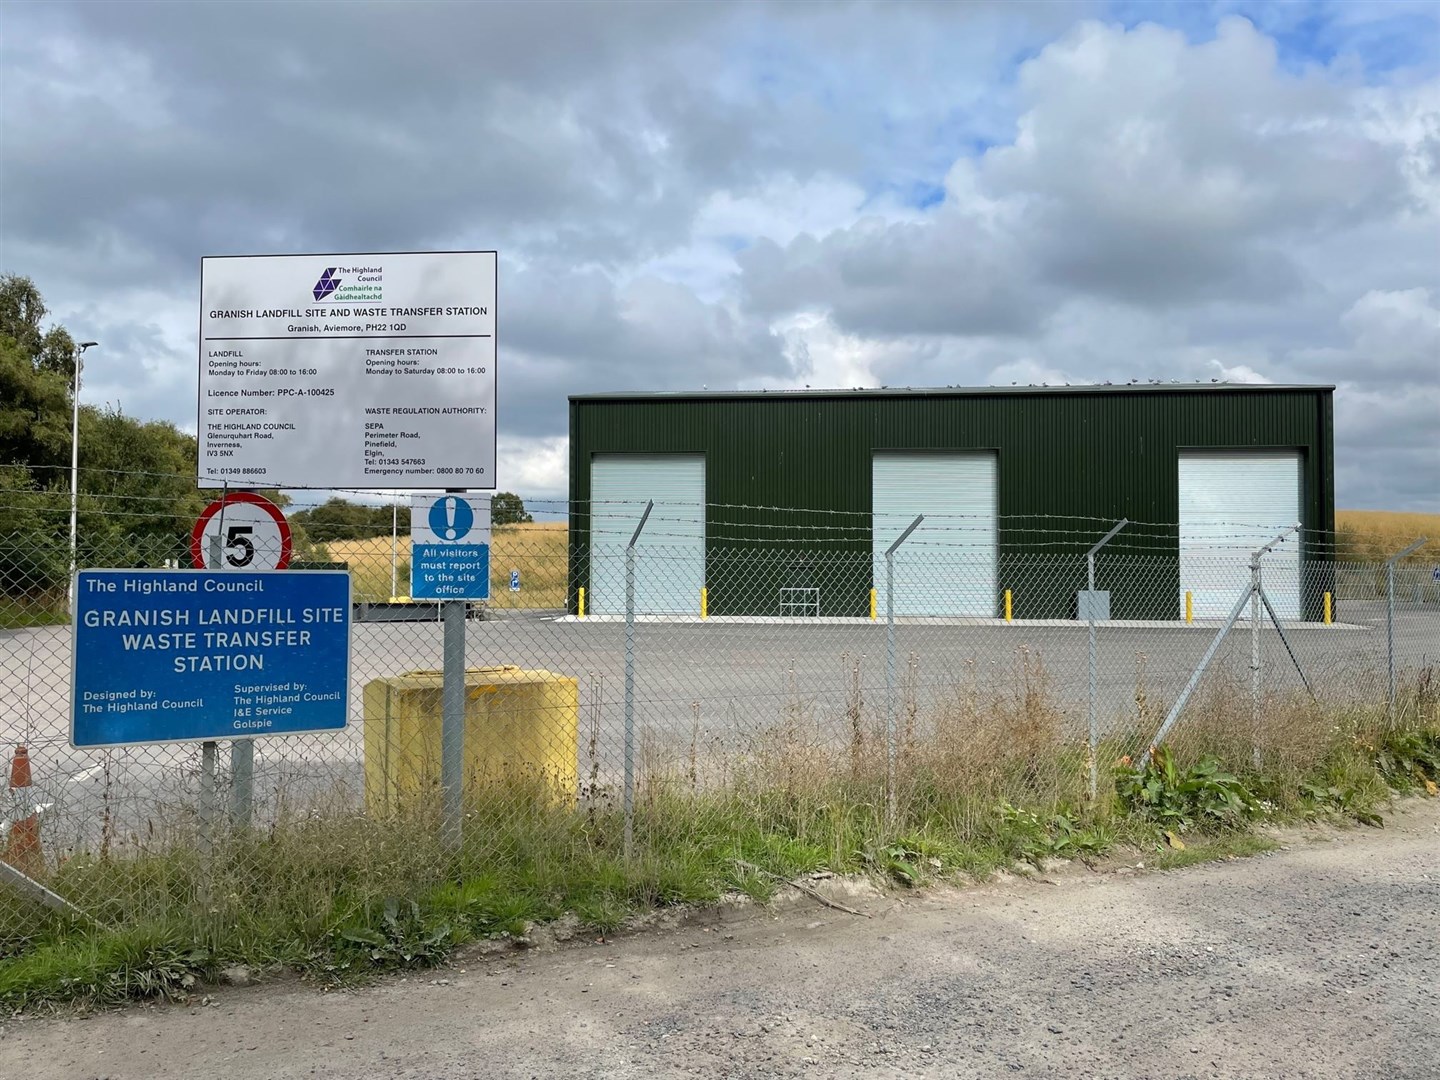 The new waste transfer station at Granish will be opening soon.